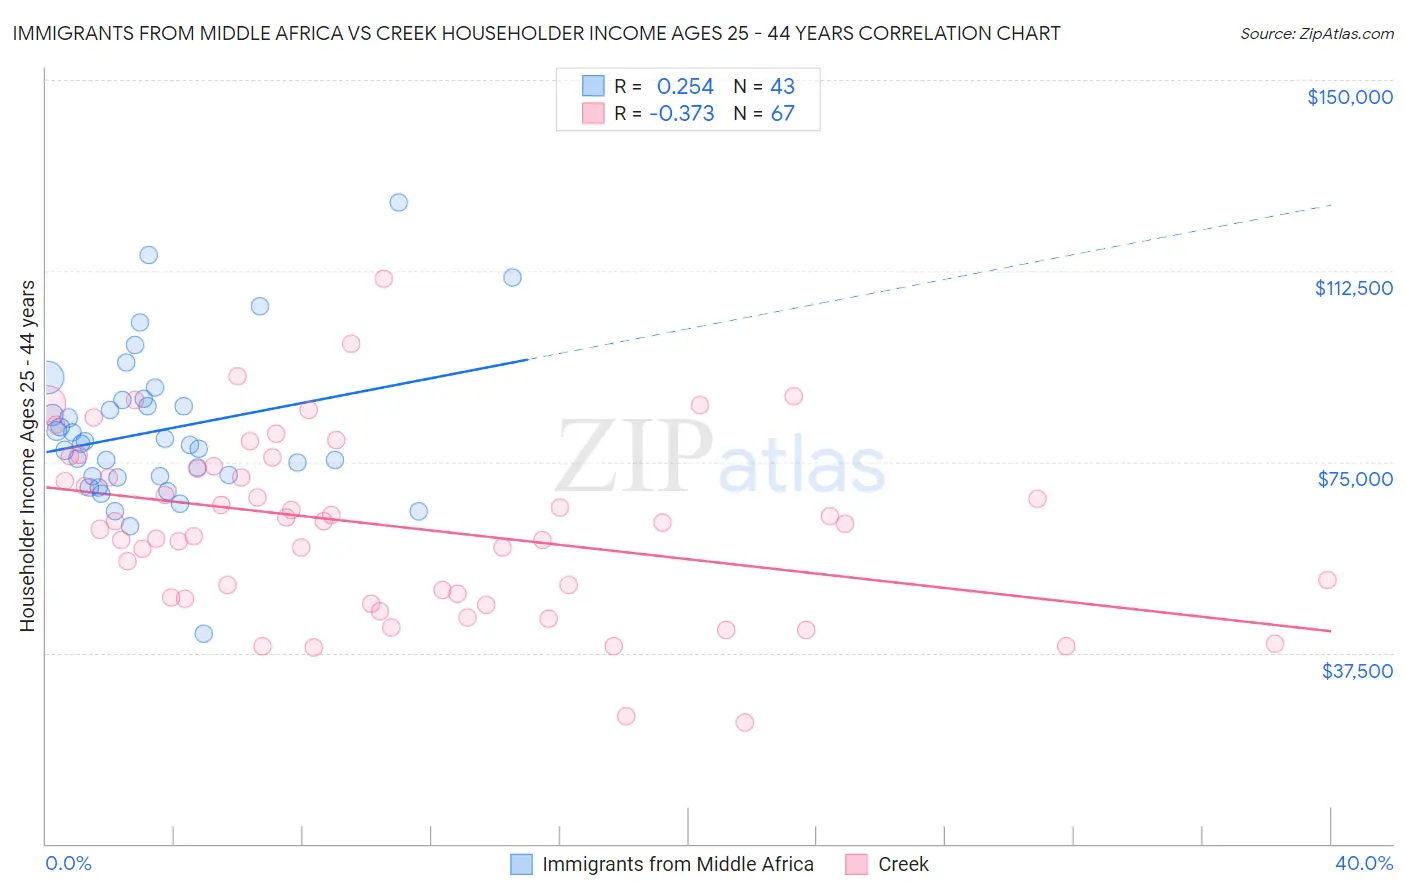 Immigrants from Middle Africa vs Creek Householder Income Ages 25 - 44 years